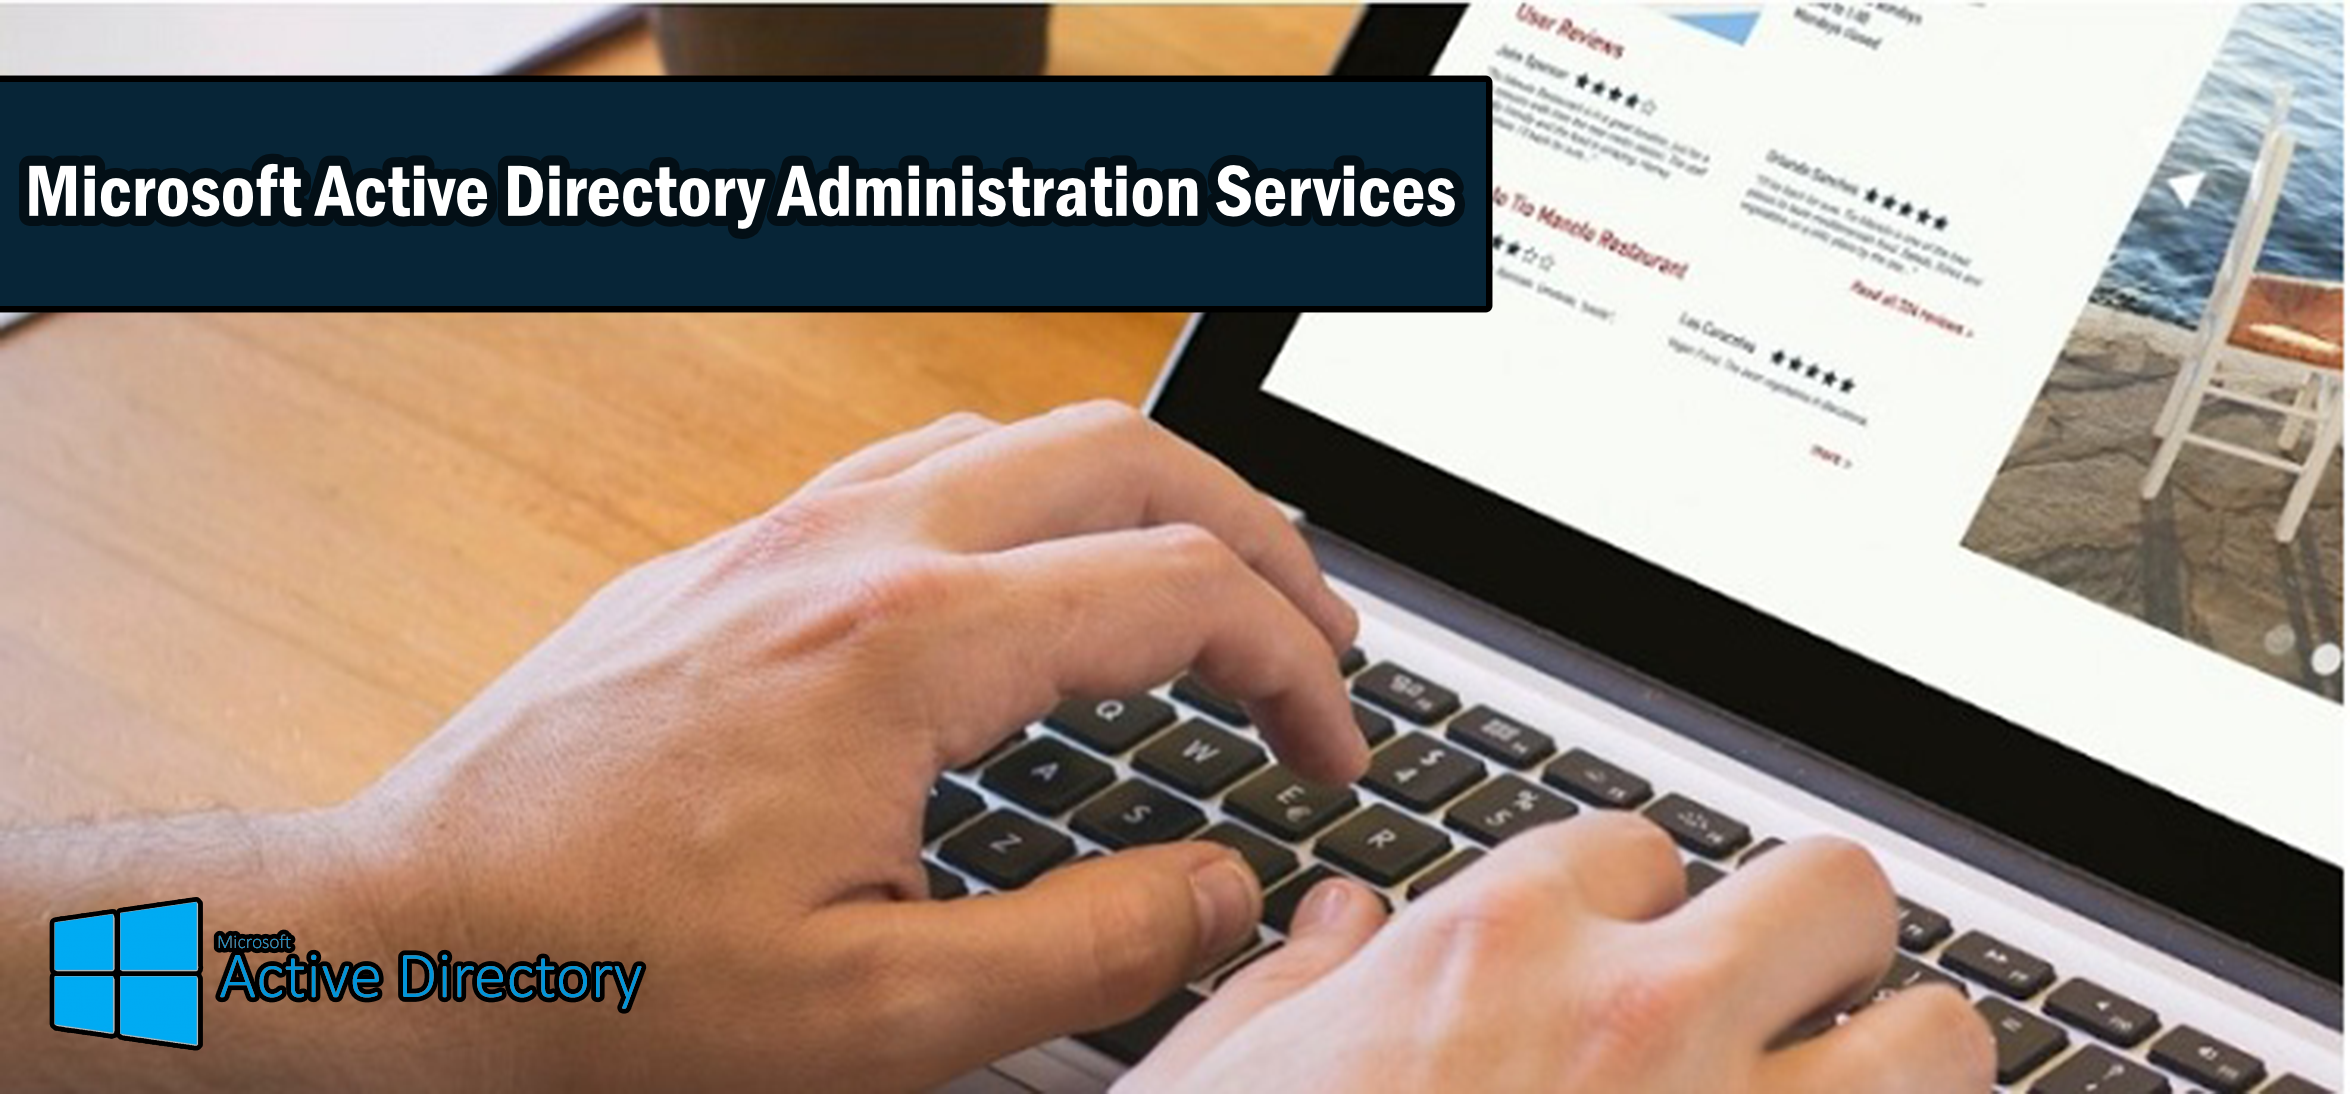 Microsoft Active Directory Administration Services in Imperial Beach CA, 91932